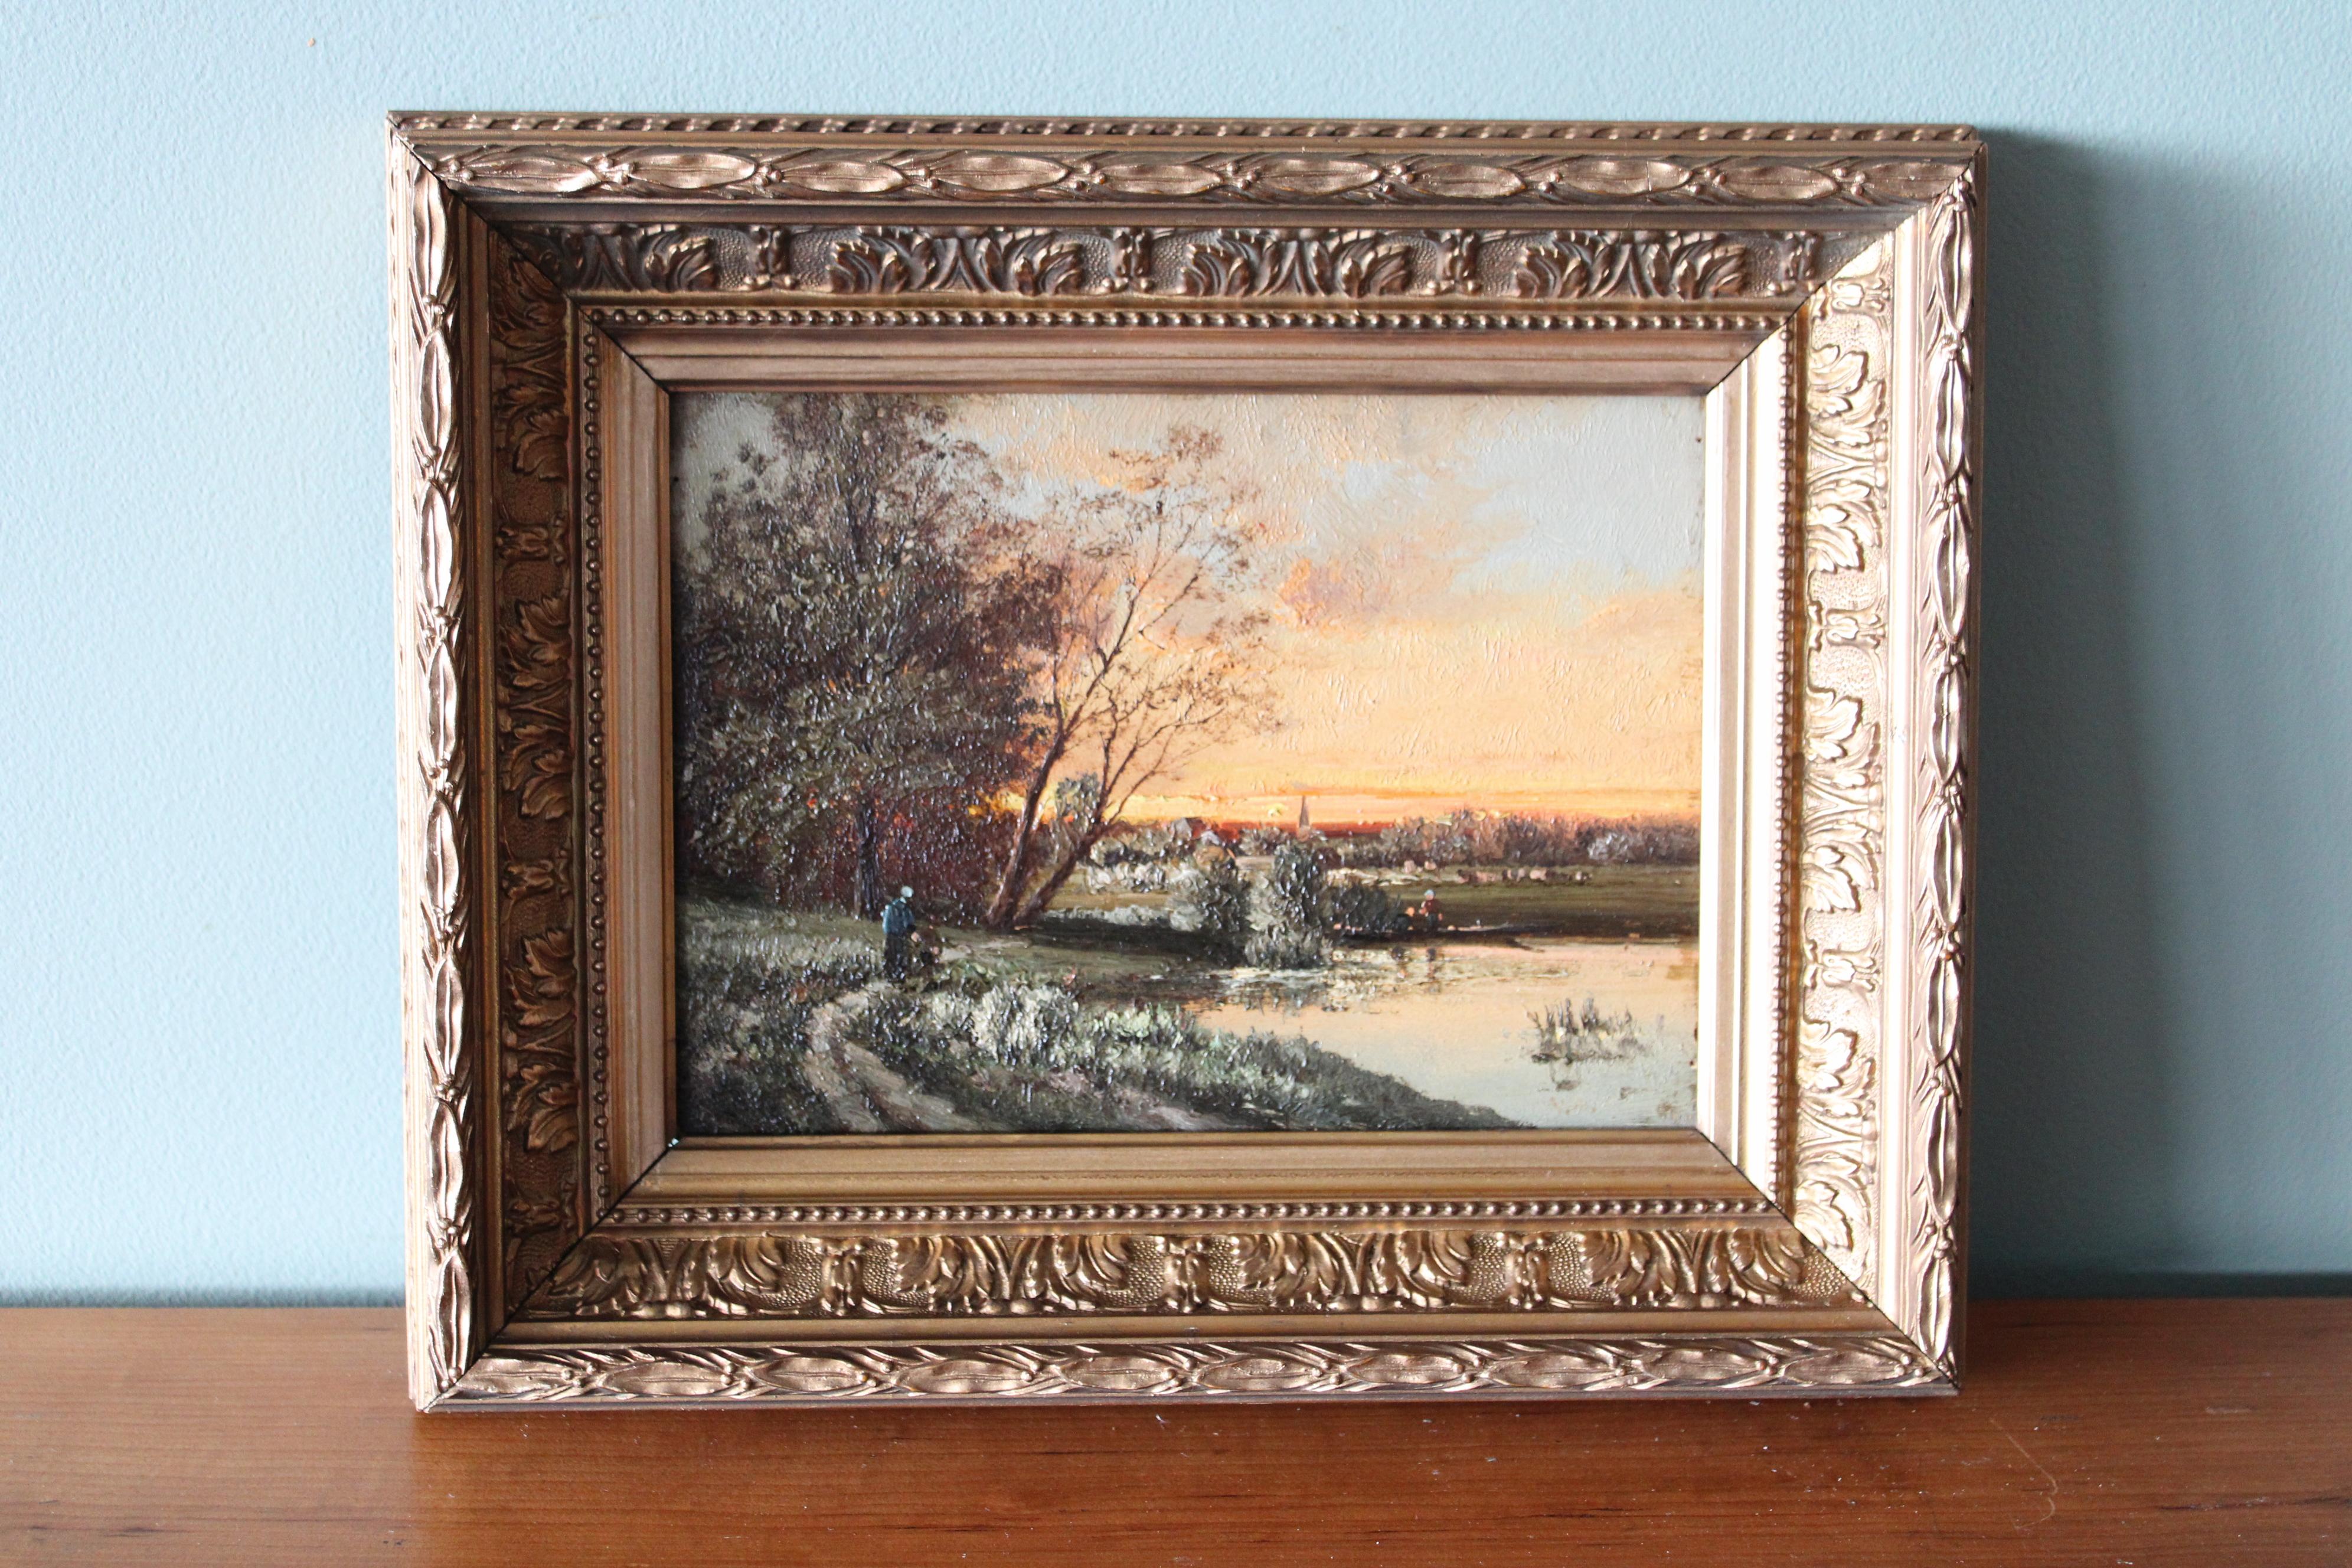 19th century Antique French landscape oil painting in traditional Barbizon style, unsigned.  A sunset lights this painting, giving it atmosphere and presence.  It's on a thick wood board, with textured elevated elements of paint throughout.

MORE